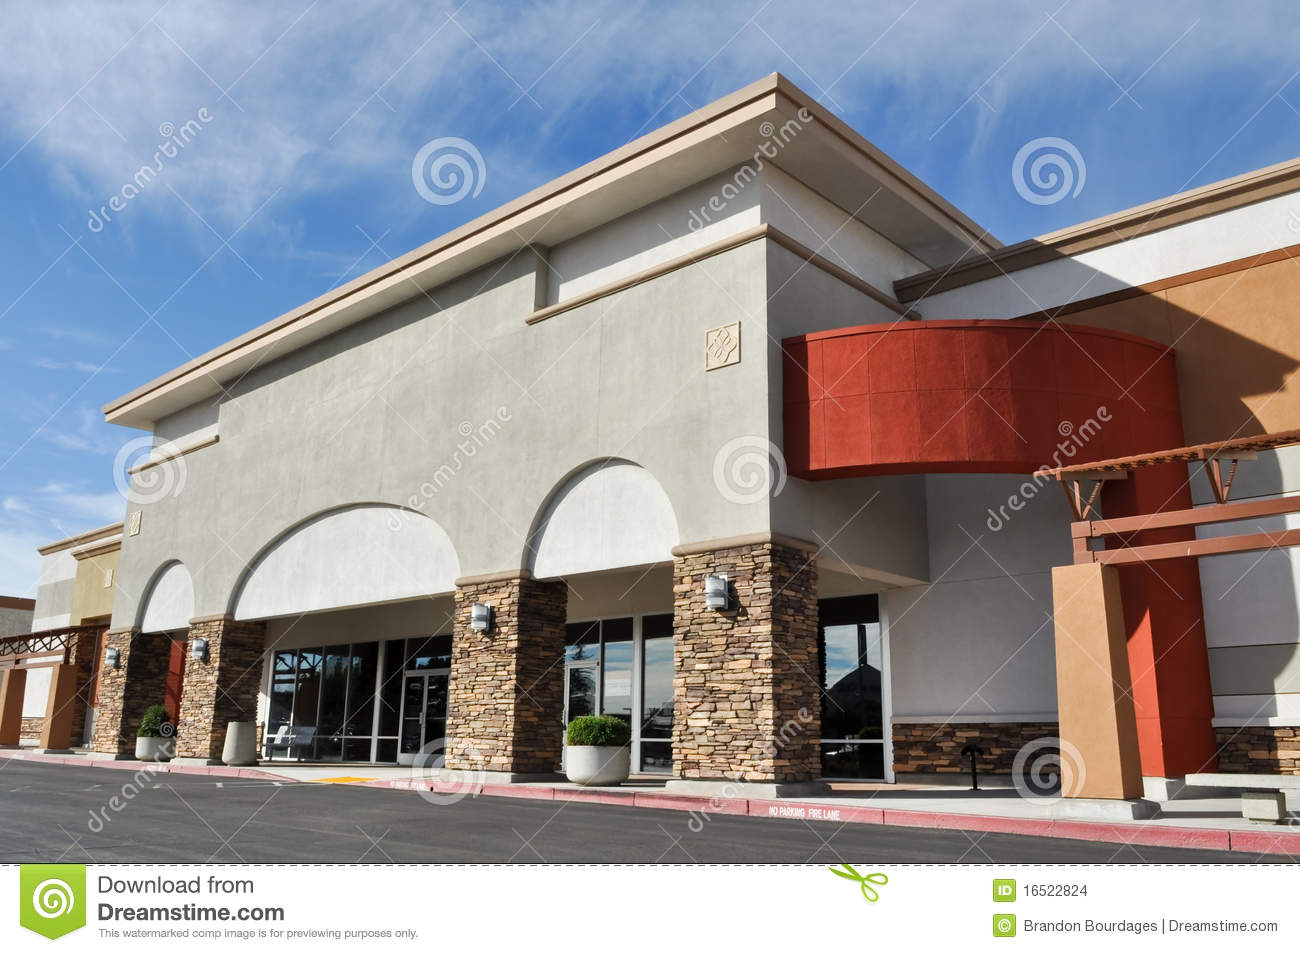 Retail Strip Center Royalty Free Stock Images.